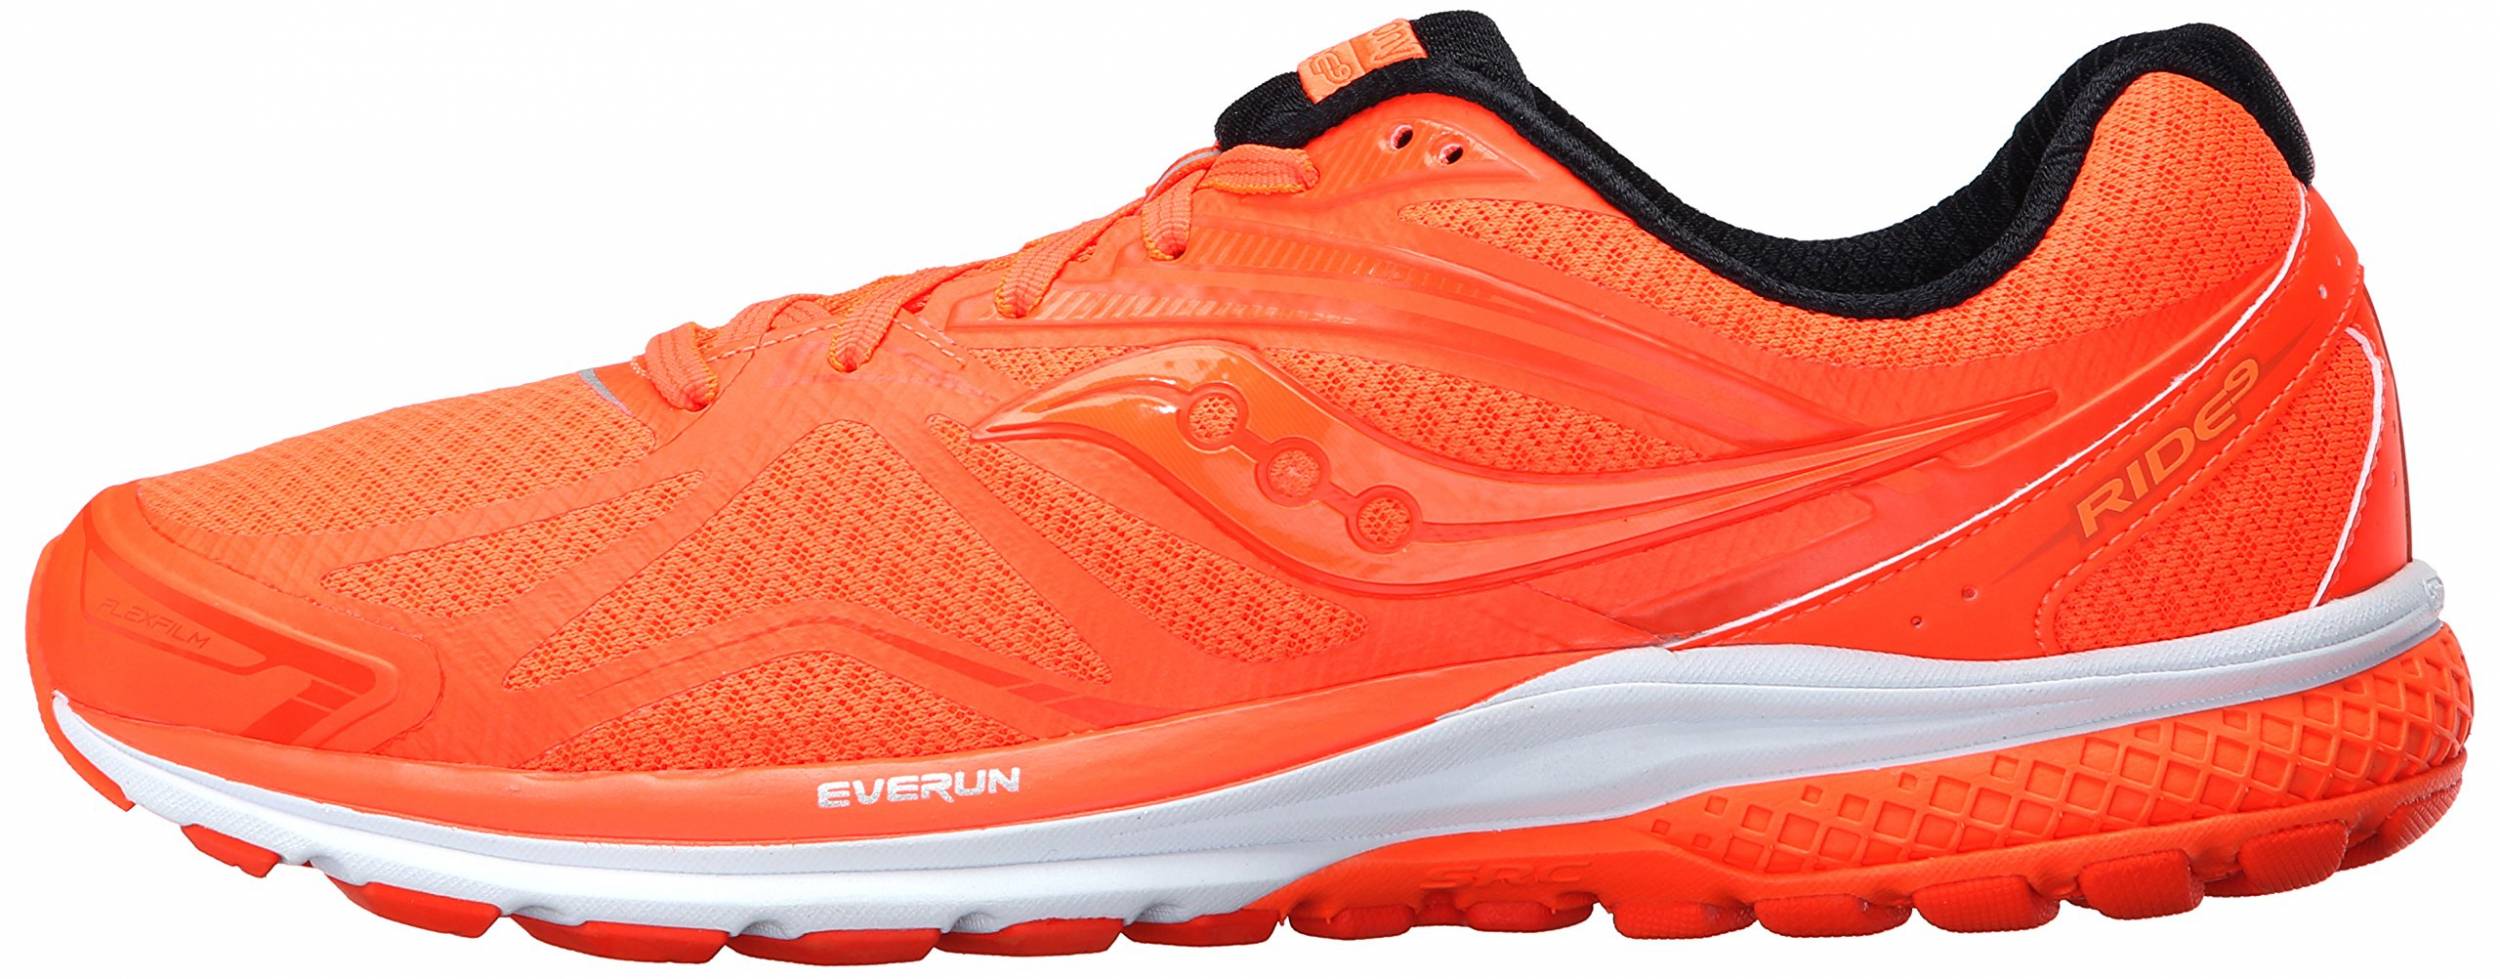 saucony ride 9 running shoes (for women)